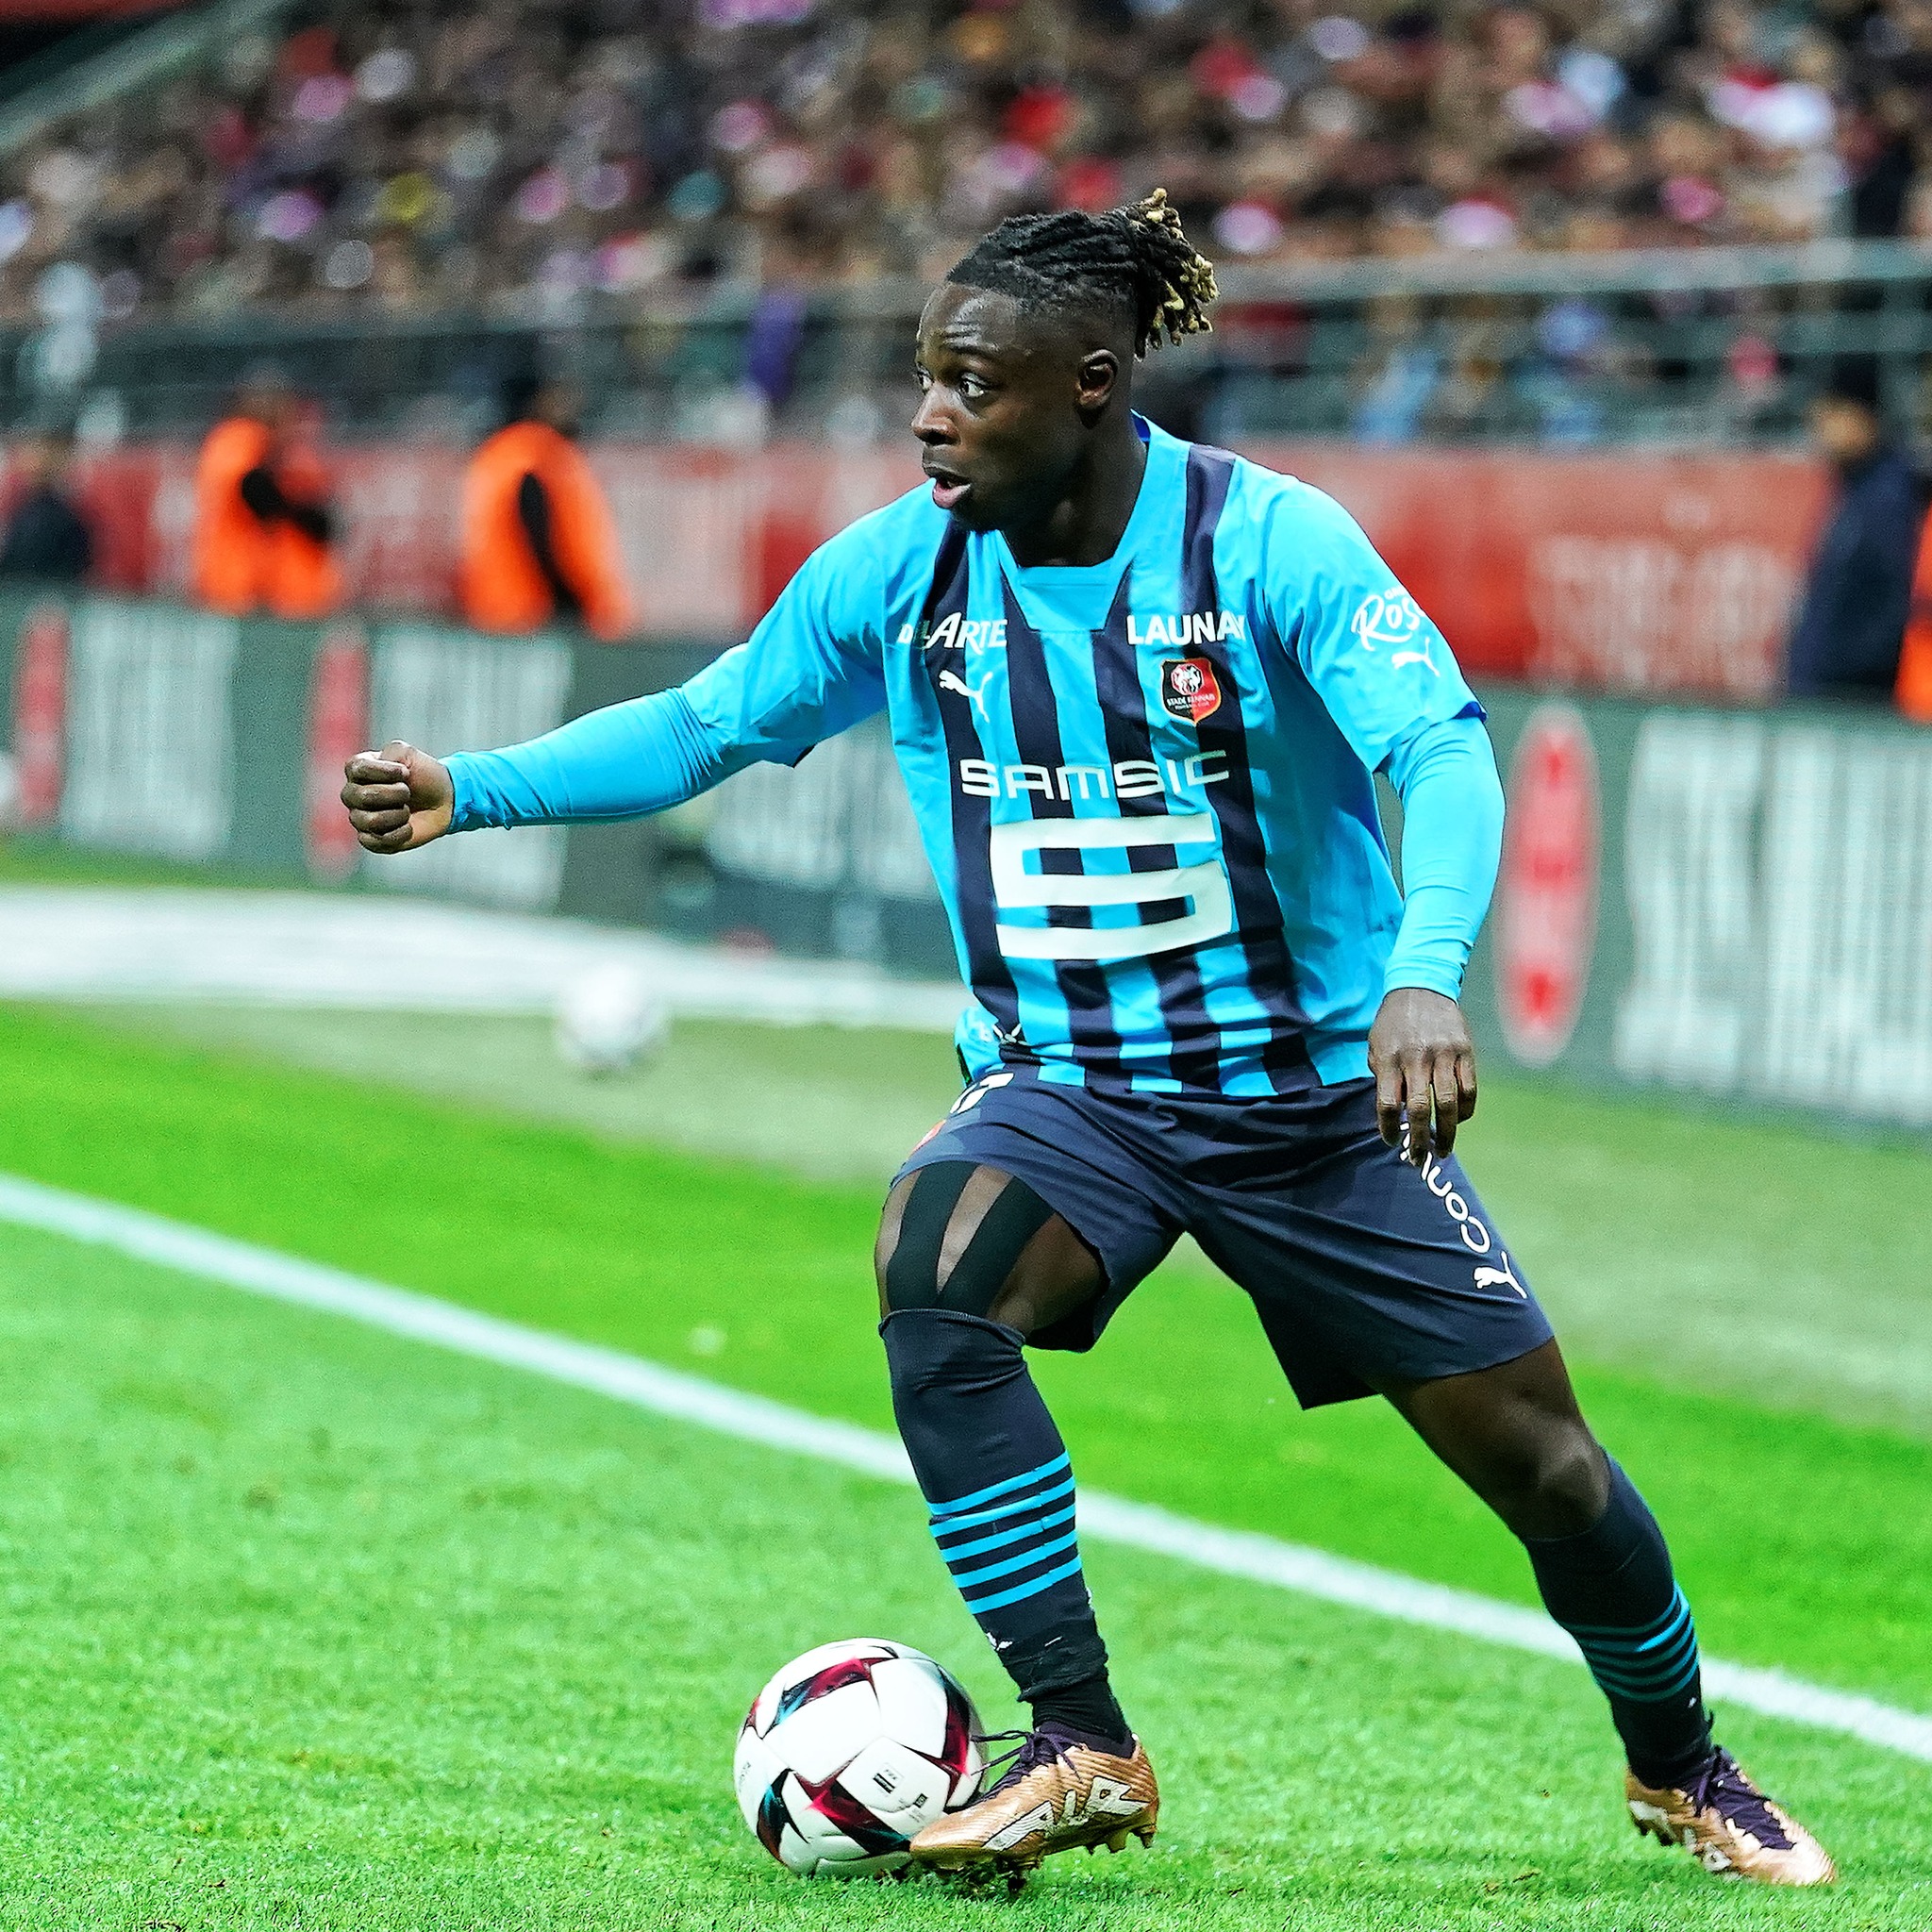 Manchester City Interested Winger Doku For $70.72 Million - Reports